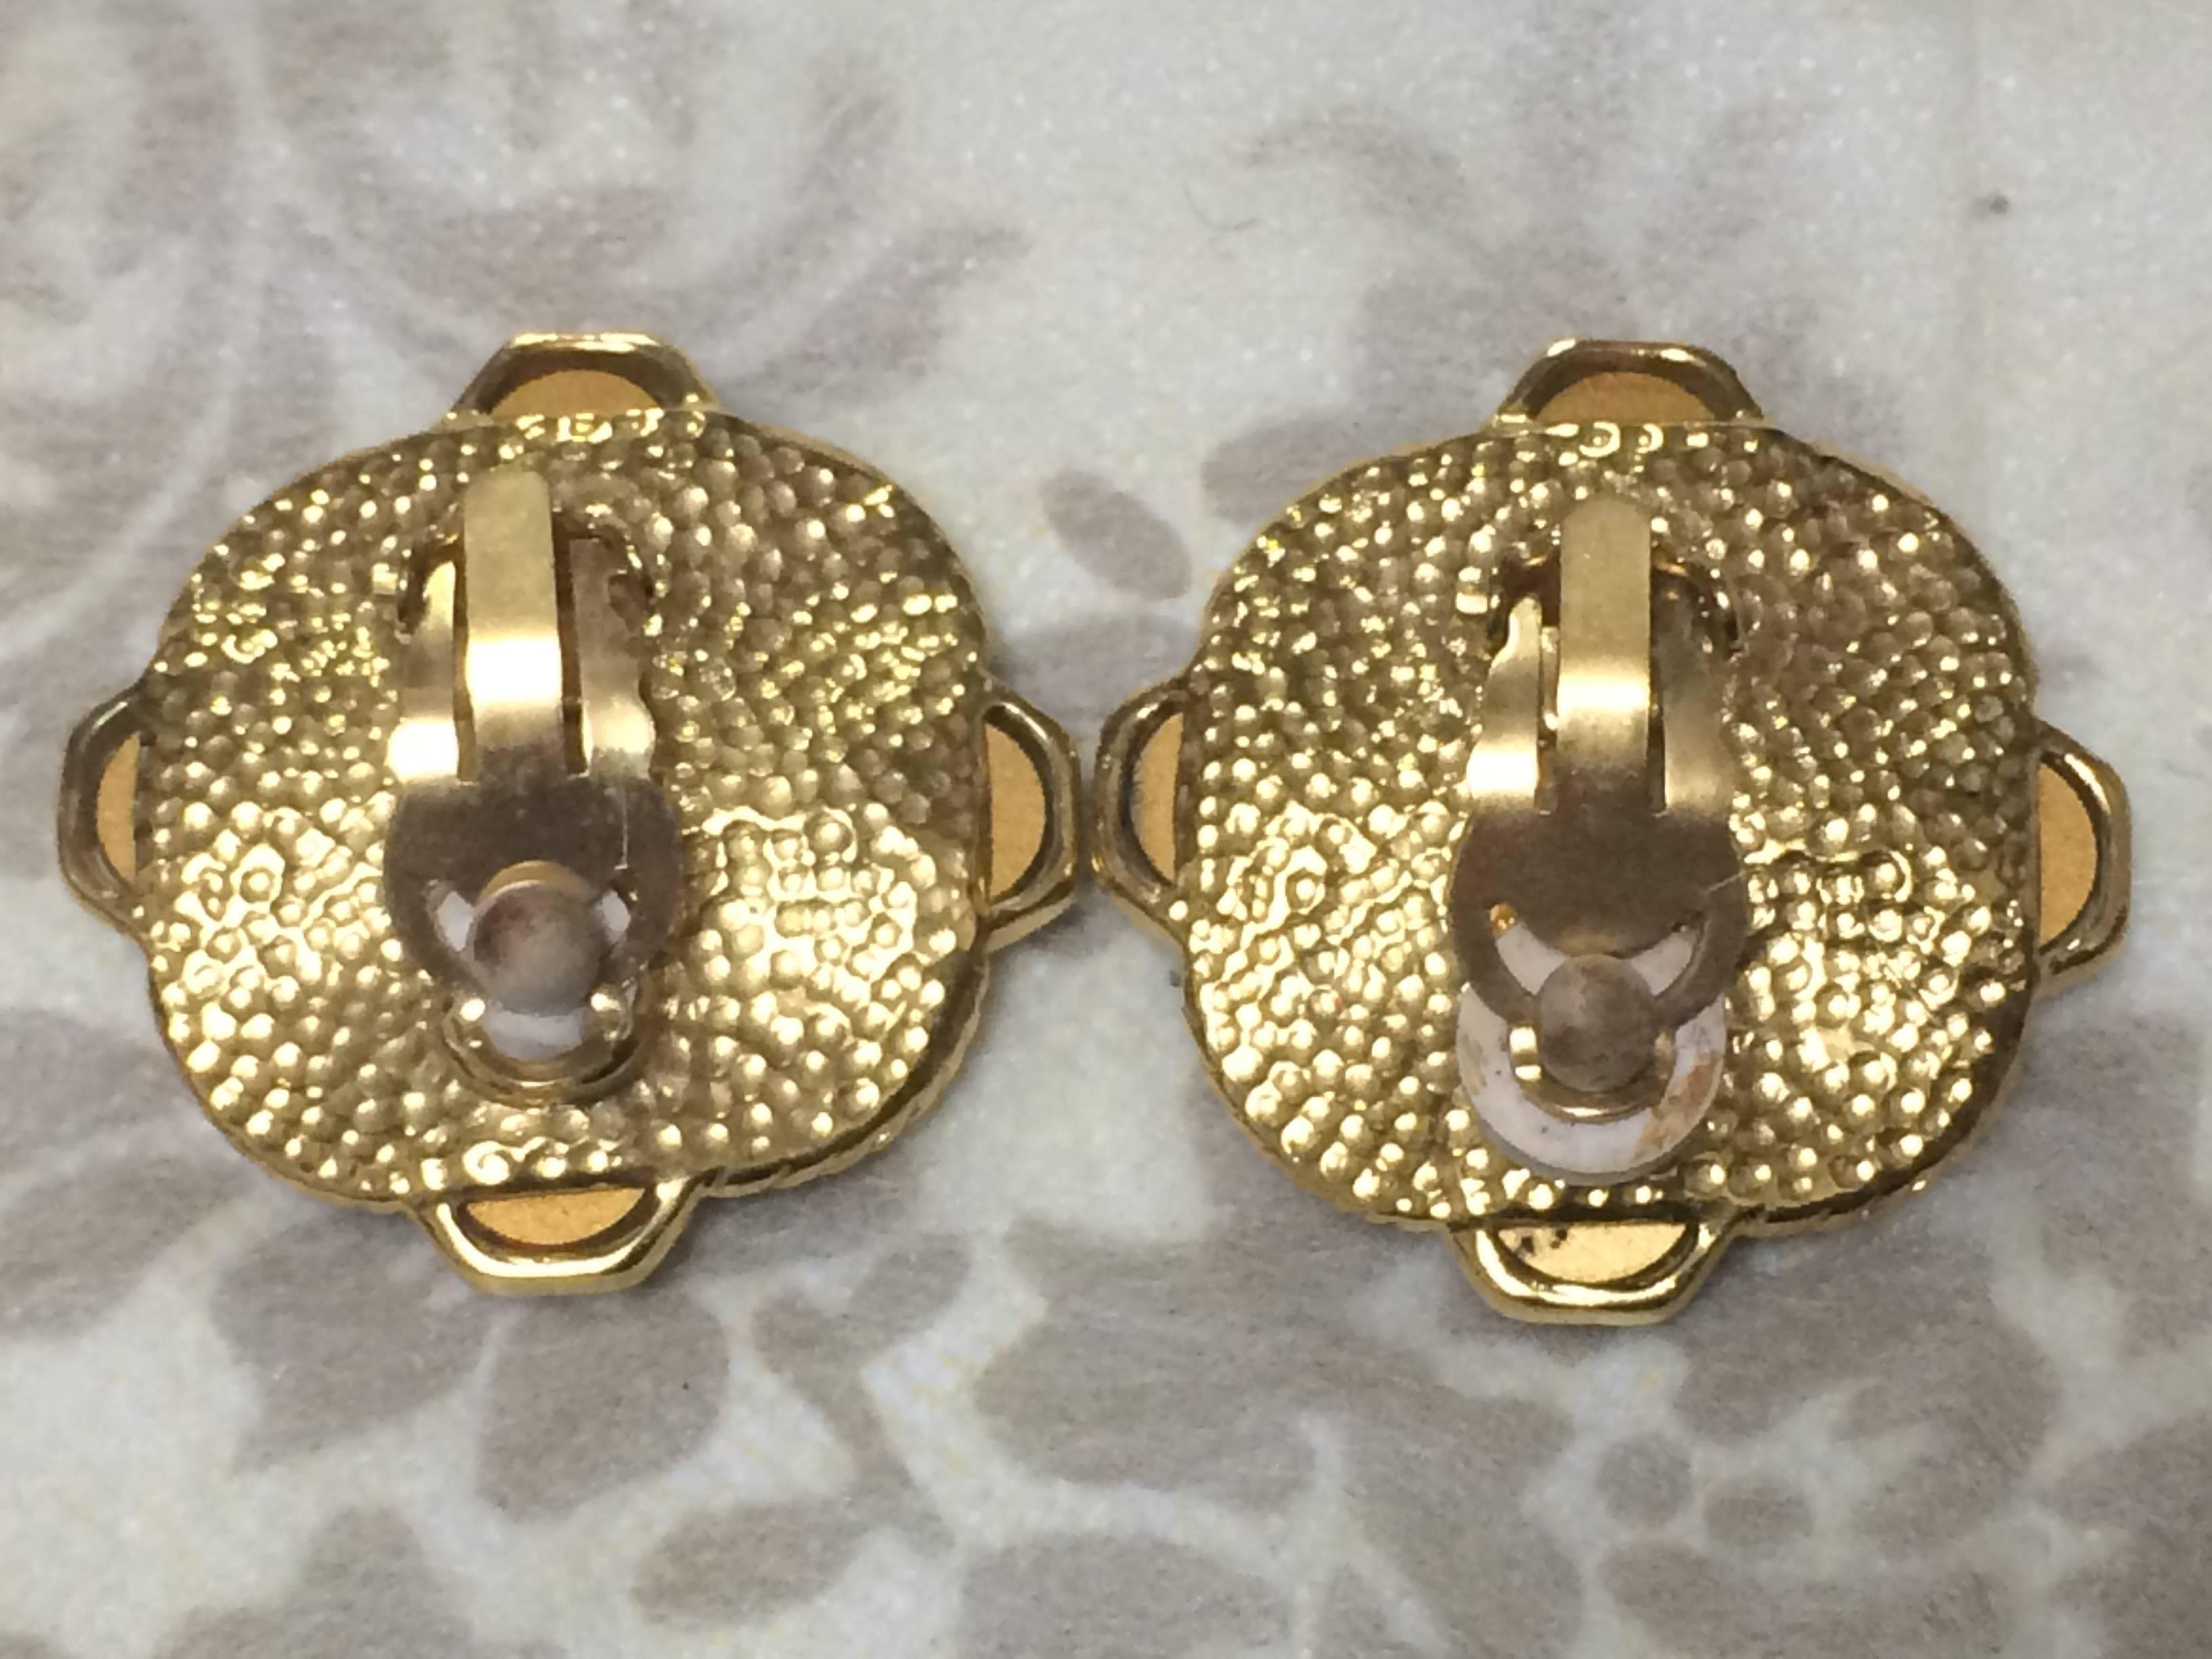 Vintage CHANEL gold tone earrings with a faux pearl, Swarovski crystal stones For Sale 1